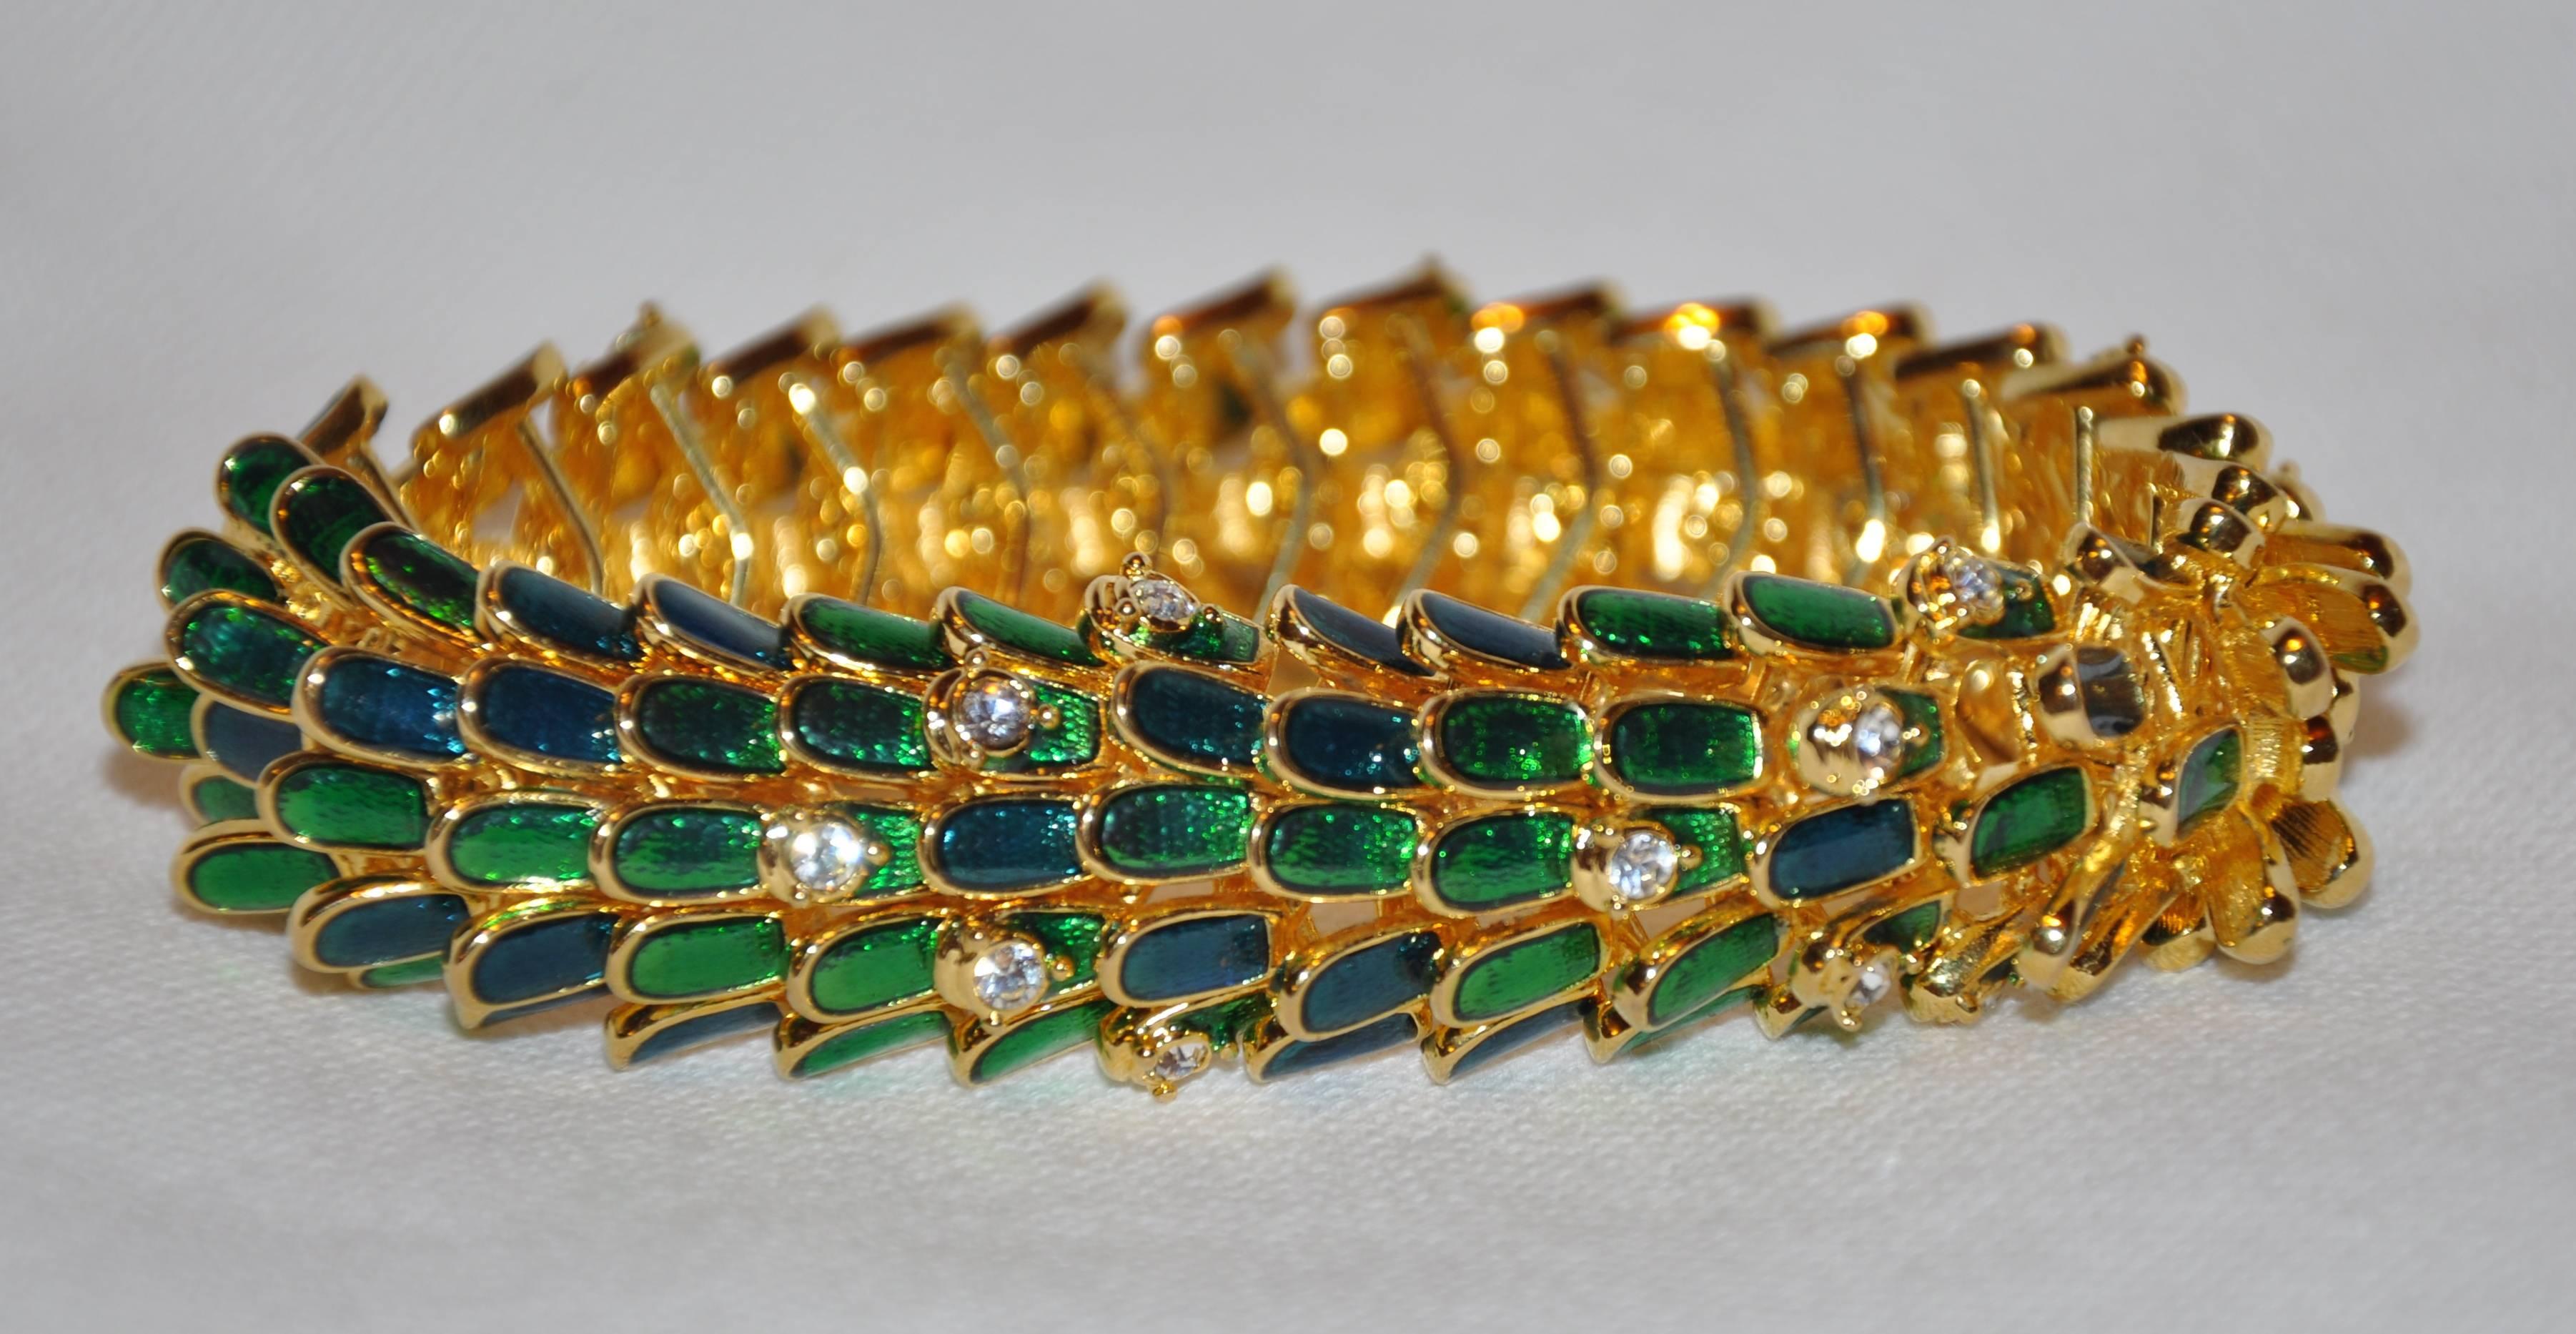        Kenneth Jay Lane wonderful polished gilded gold vermeil hardware bracelet detailed with bold rich green enamel is detailed with specks of faux diamonds. This wonderful bracelet drapes beautifully when worn. The interior is finished with